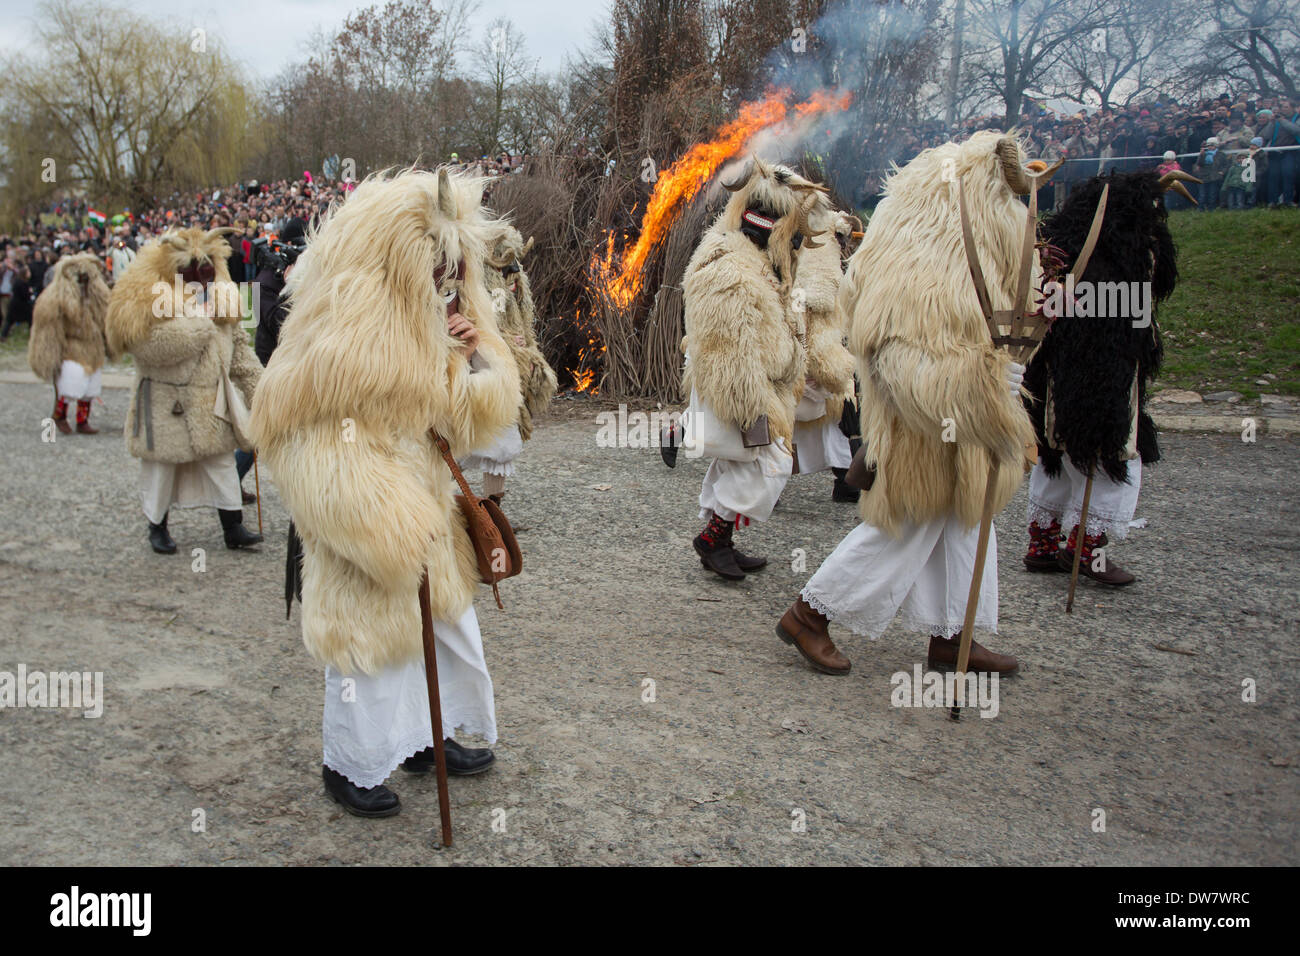 Mohacs. 2nd Mar, 2014. Masked busos (people wearing sheep fur and wooden masks) celebrate the traditional Buso Carnival in Mohacs, southern Hungary on March 2, 2014. The Buso Carnival is an annual celebration of Sokac ethnic group living in Mohacs to bid farewell to winter and welcome spring. According to legend, local people dressed up in sheep fur and wooden masks in a bid to frighten off the Turkish invaders in the 16th century. This year's carnival takes place from February 27 till March 4. Credit:  Attila Volgyi/Xinhua/Alamy Live News Stock Photo